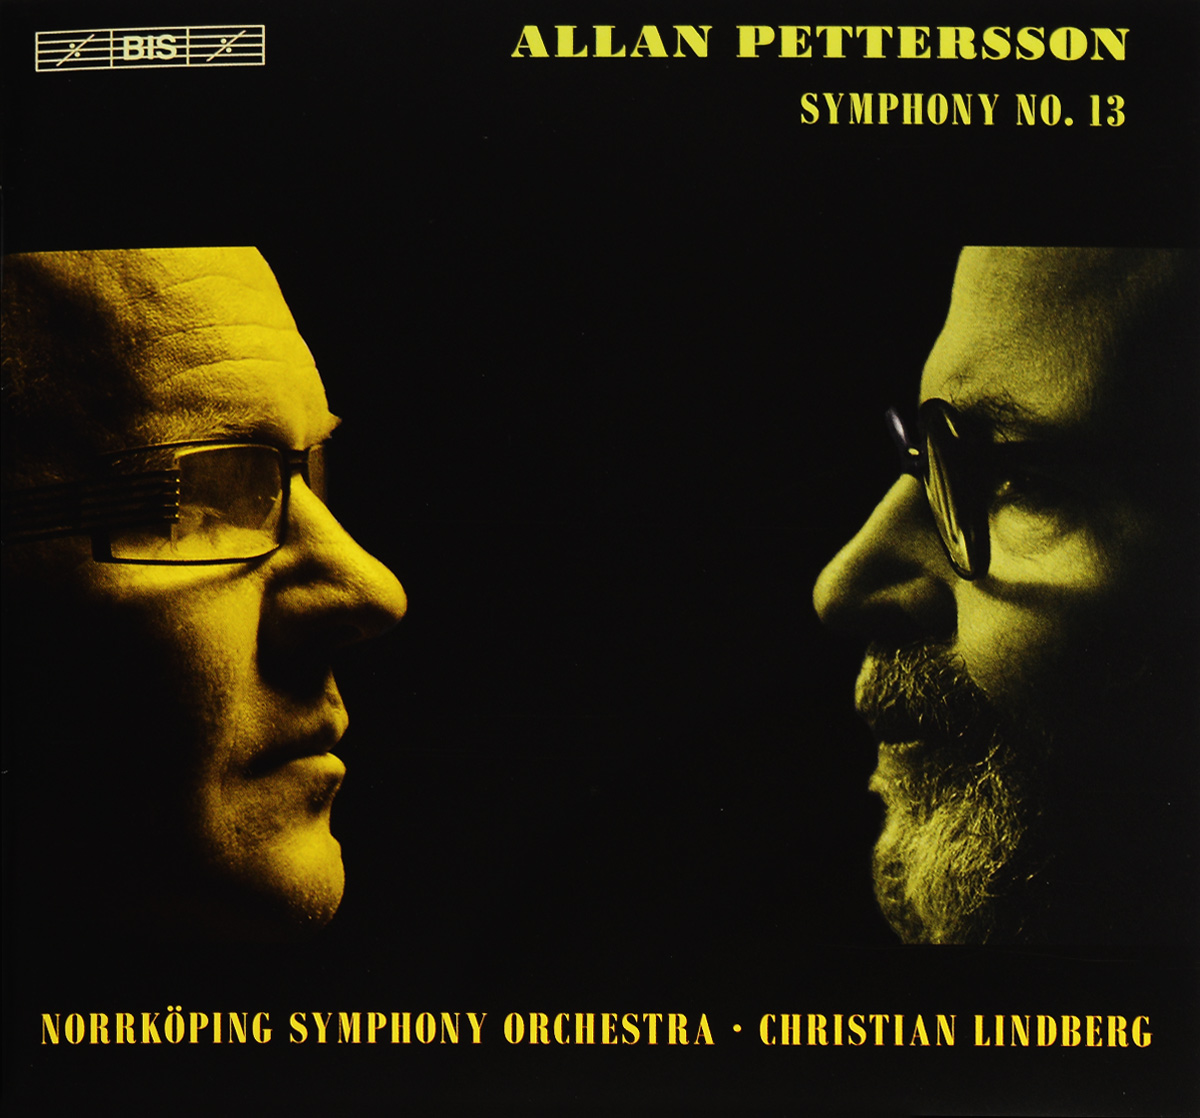 Norrkoping Symphony Orchestra, Christian Lindberg. Allan Pettersson. Symphony No. 13 (SACD)